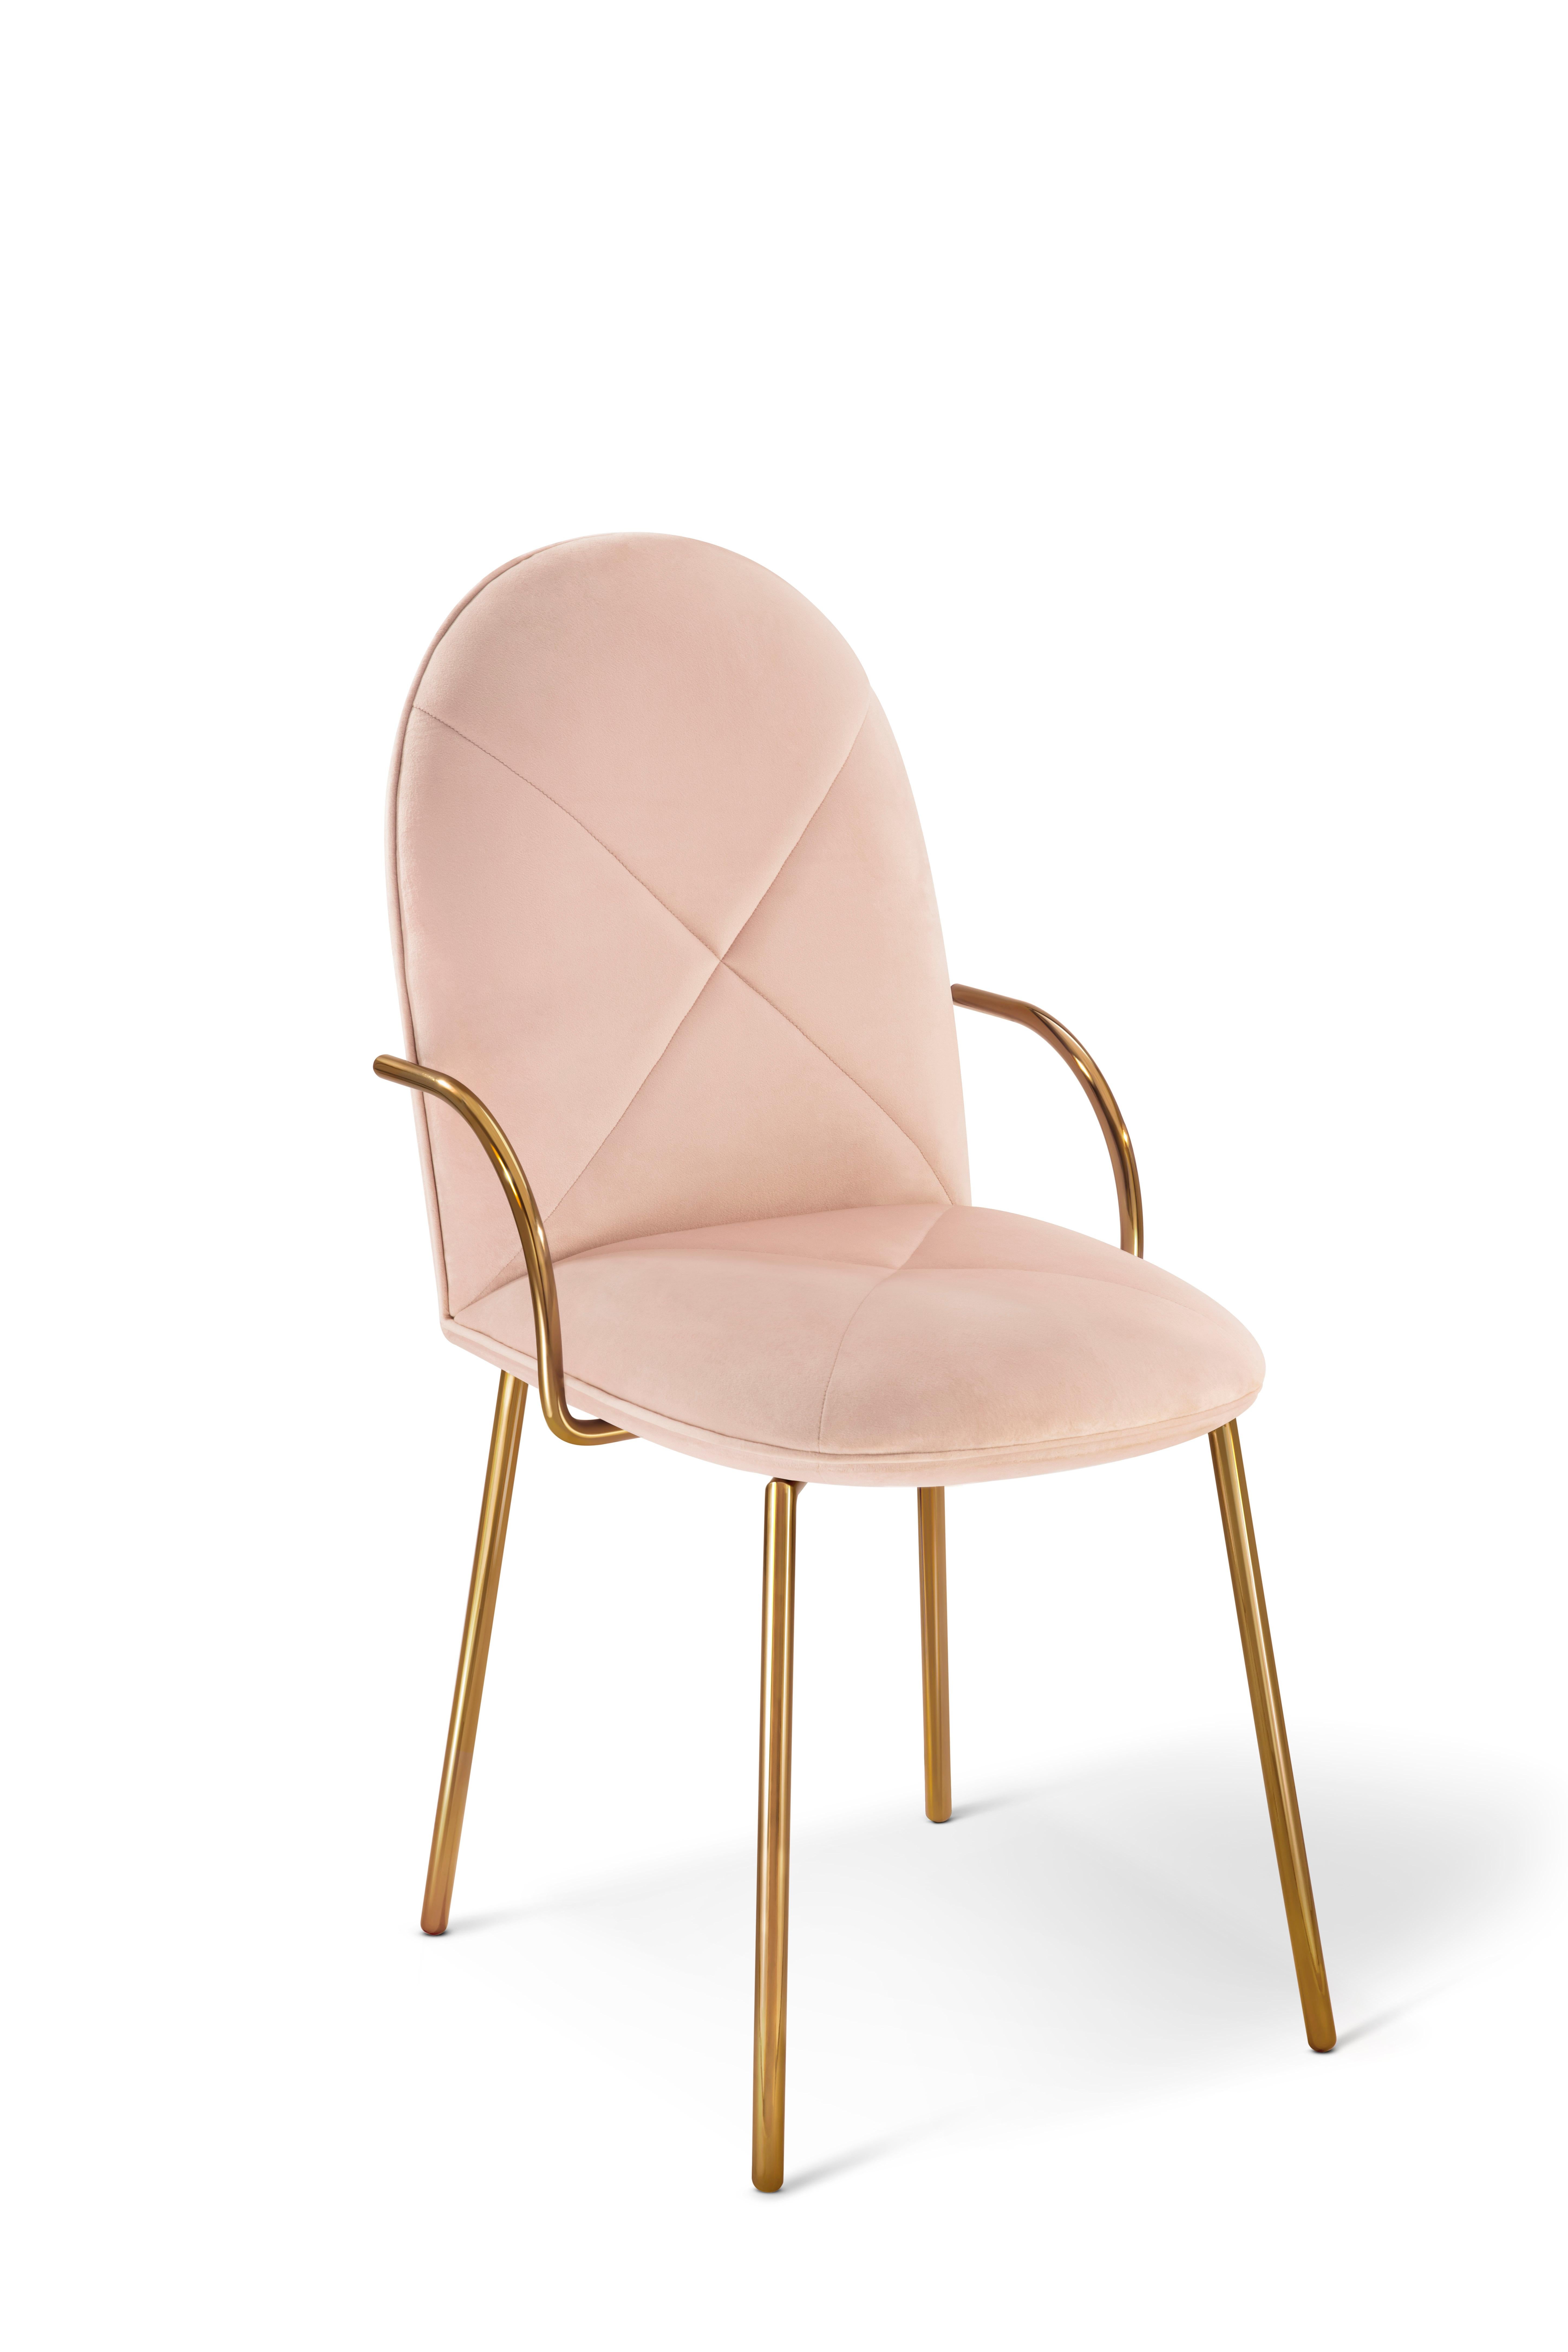 Orion Dining Chair with Plush Pink Velvet and Gold Arms by Nika Zupanc is a beautiful chair in pink velvet contrasted with luxurious gold trims. Ultra-chic in any interior space.

Nika Zupanc, a strikingly renowned Slovenian designer, never shies